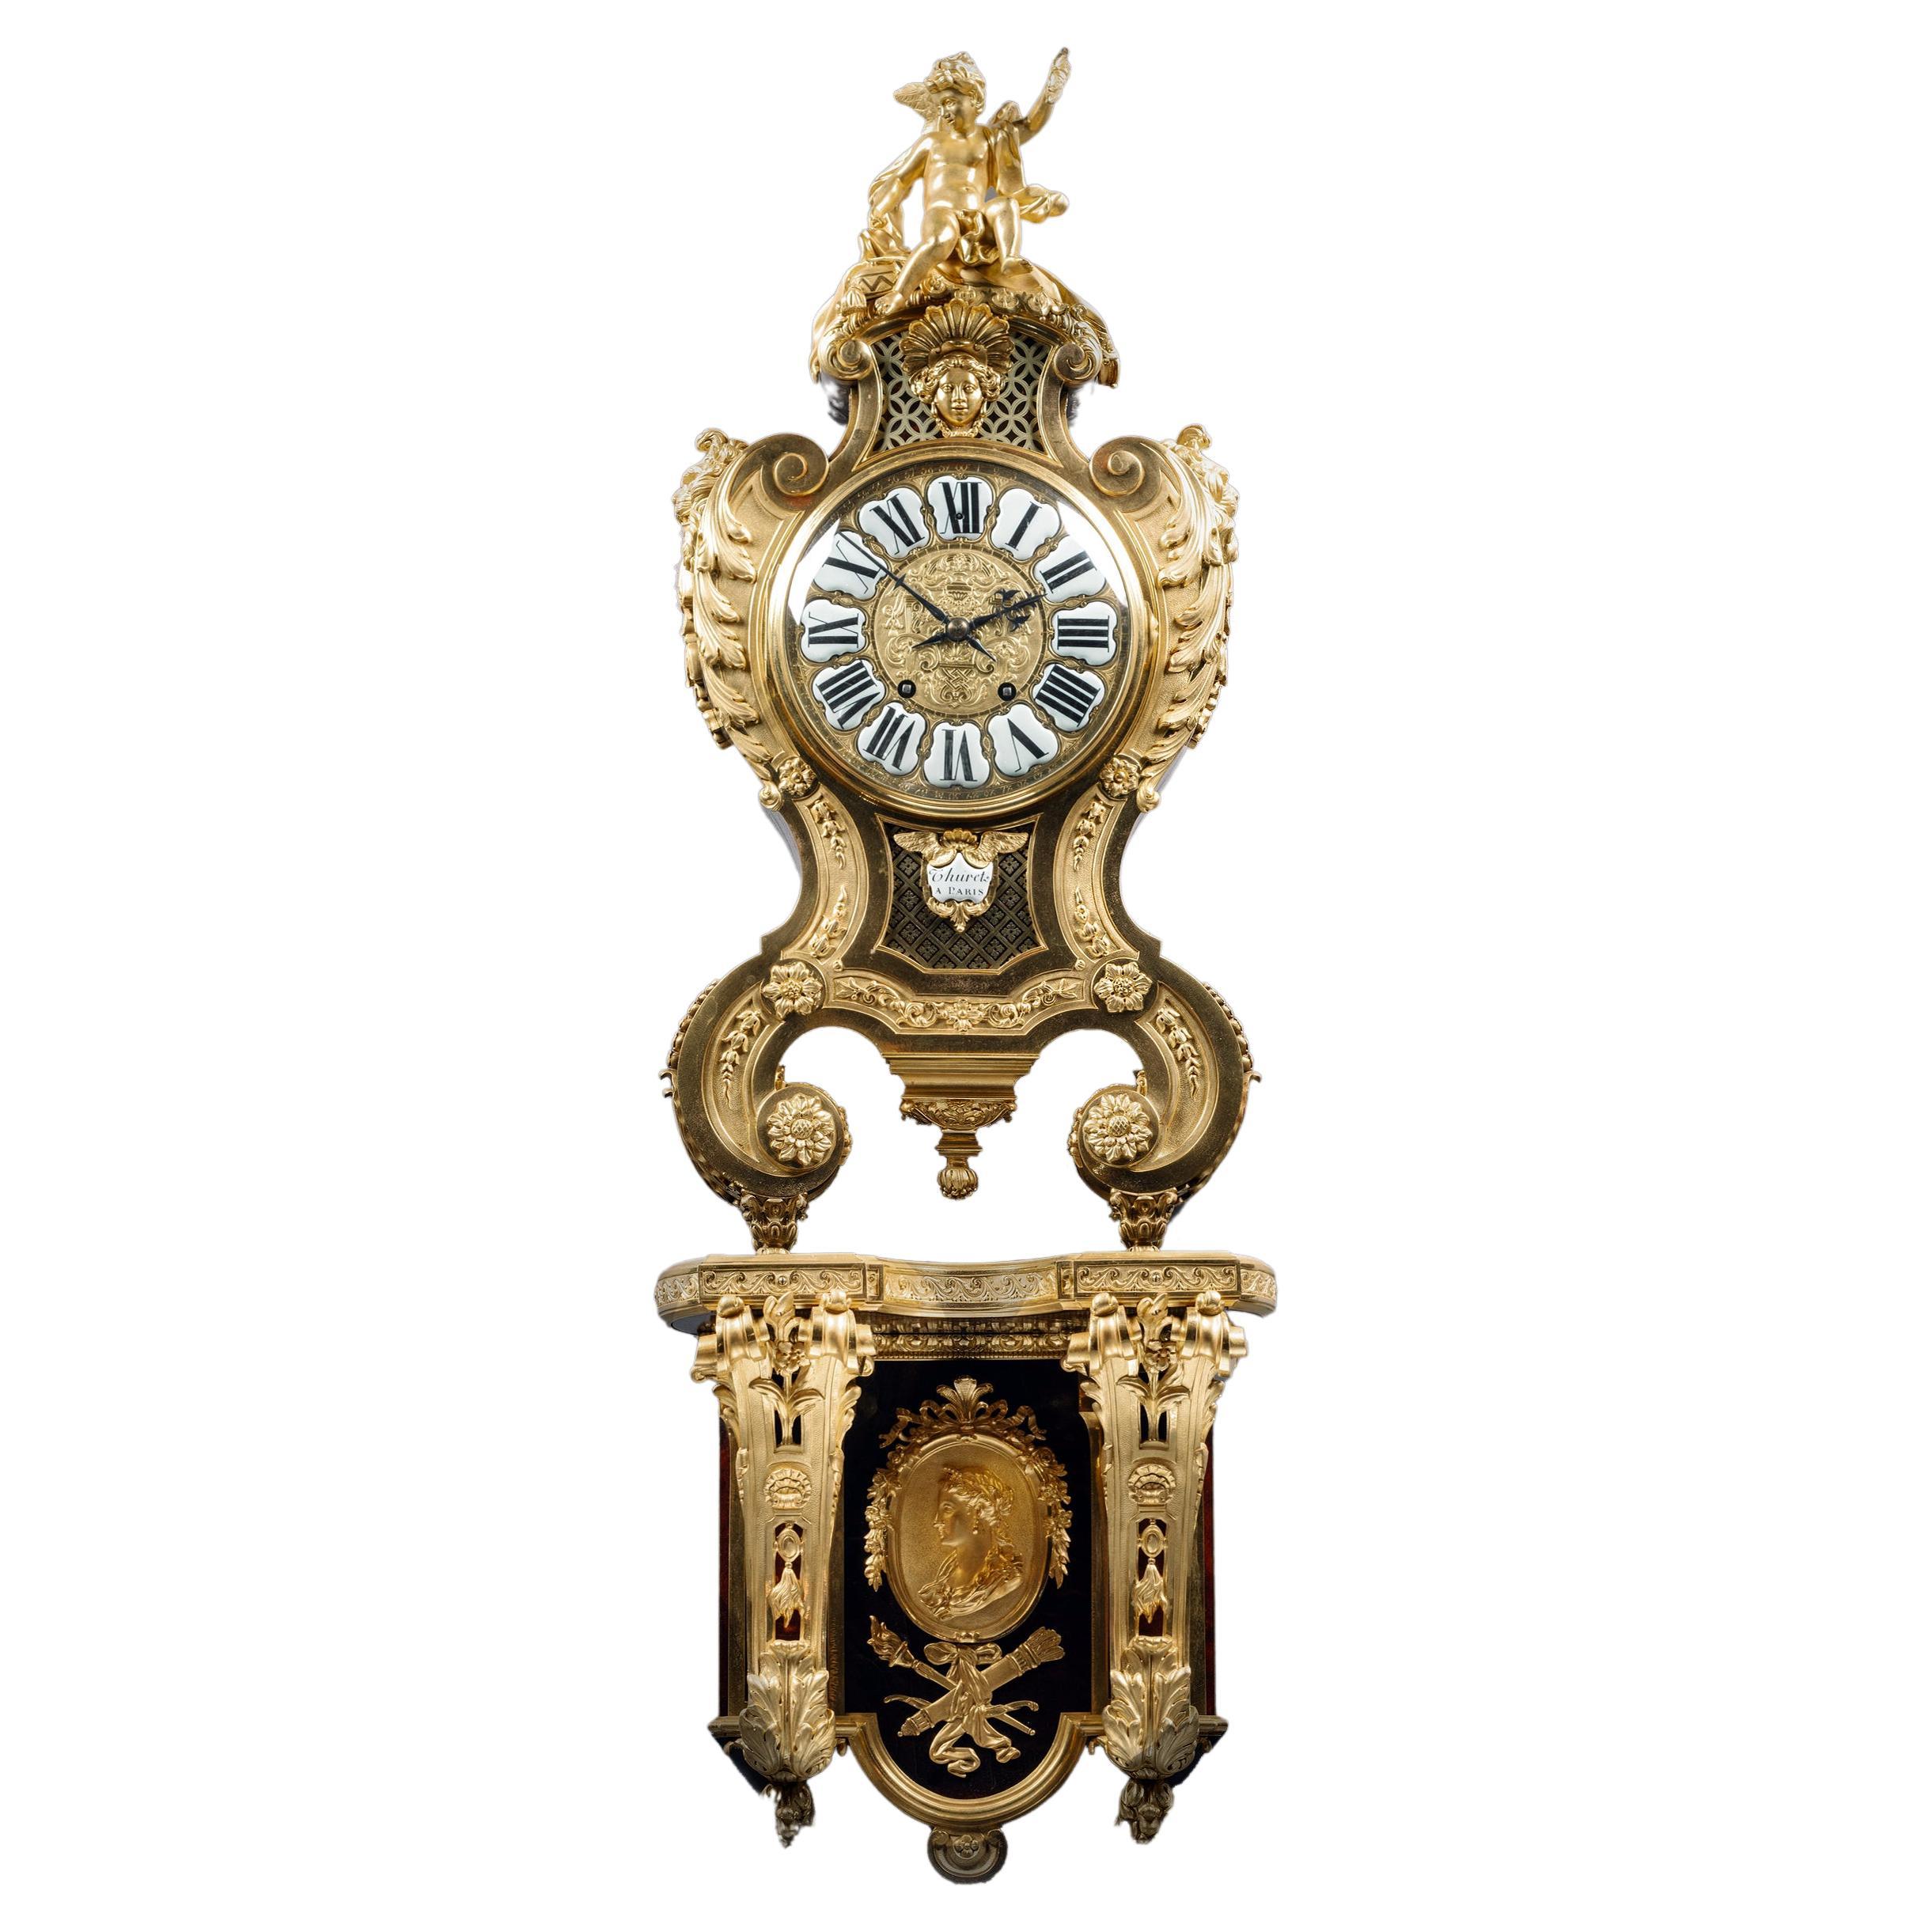 A Regence Style Grand Cartel de Applique In the Manner of André-Charles Boulle For Sale